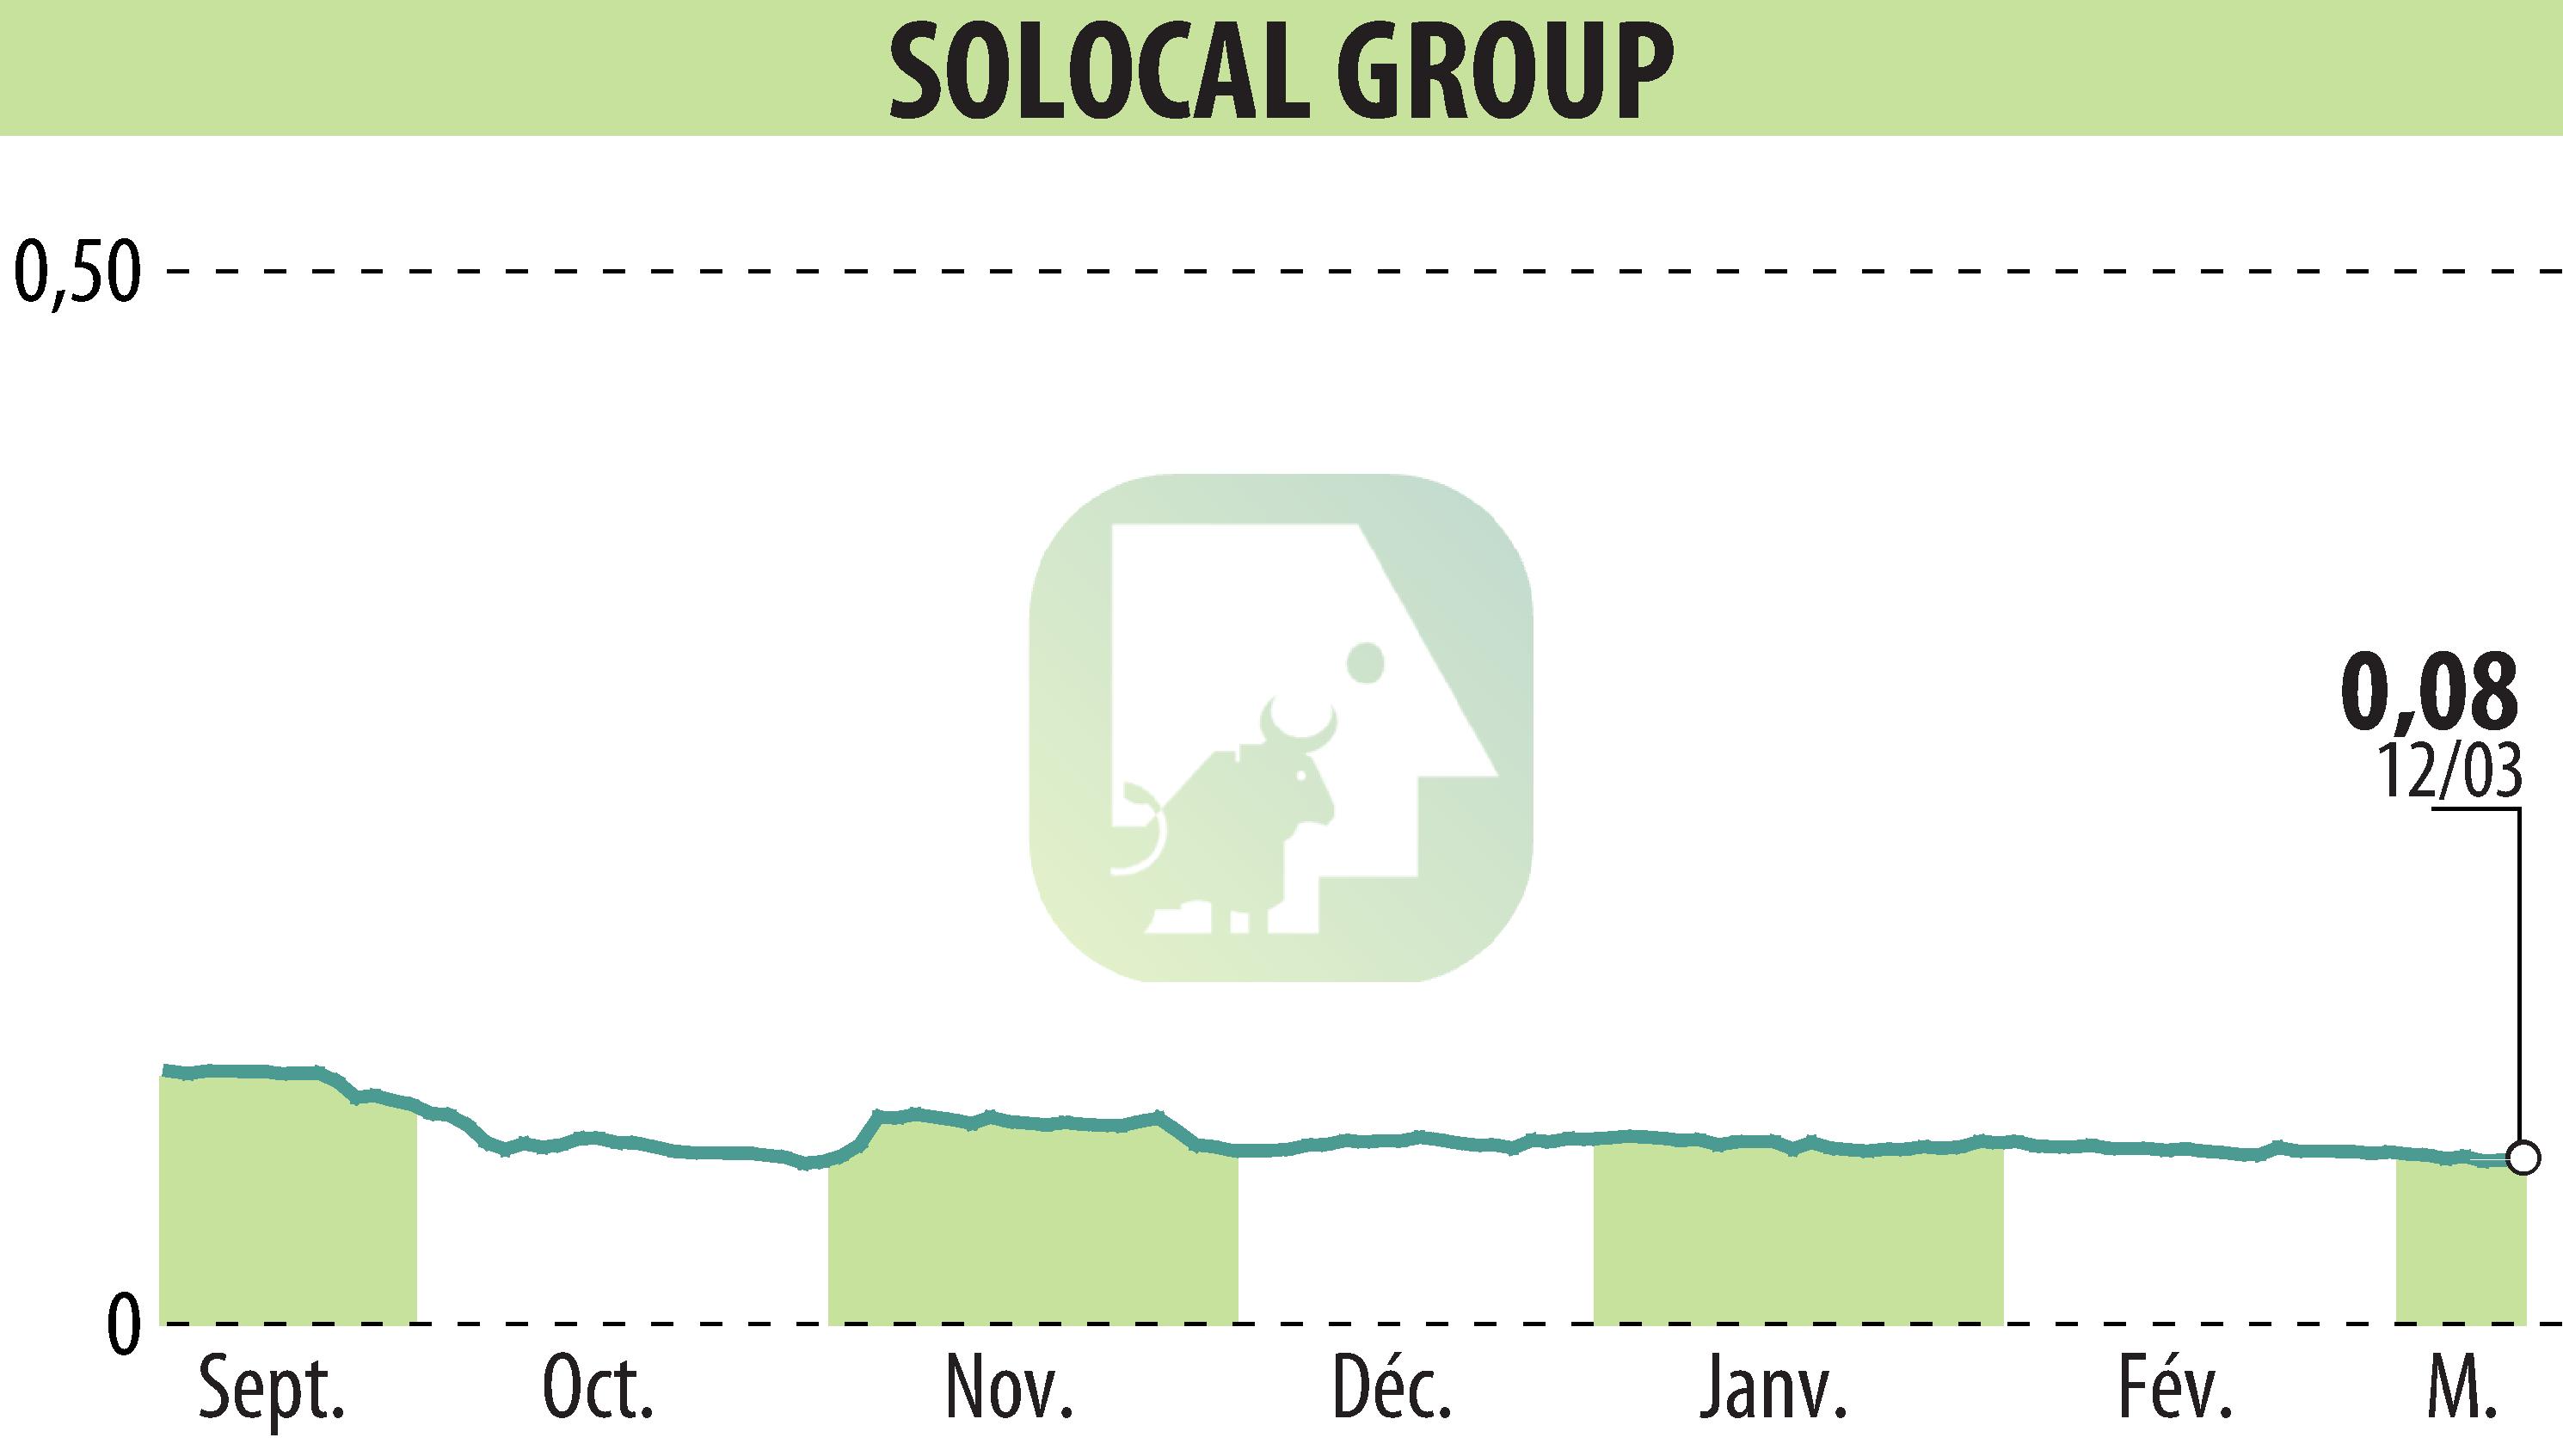 Stock price chart of SOLOCAL (EPA:LOCAL) showing fluctuations.